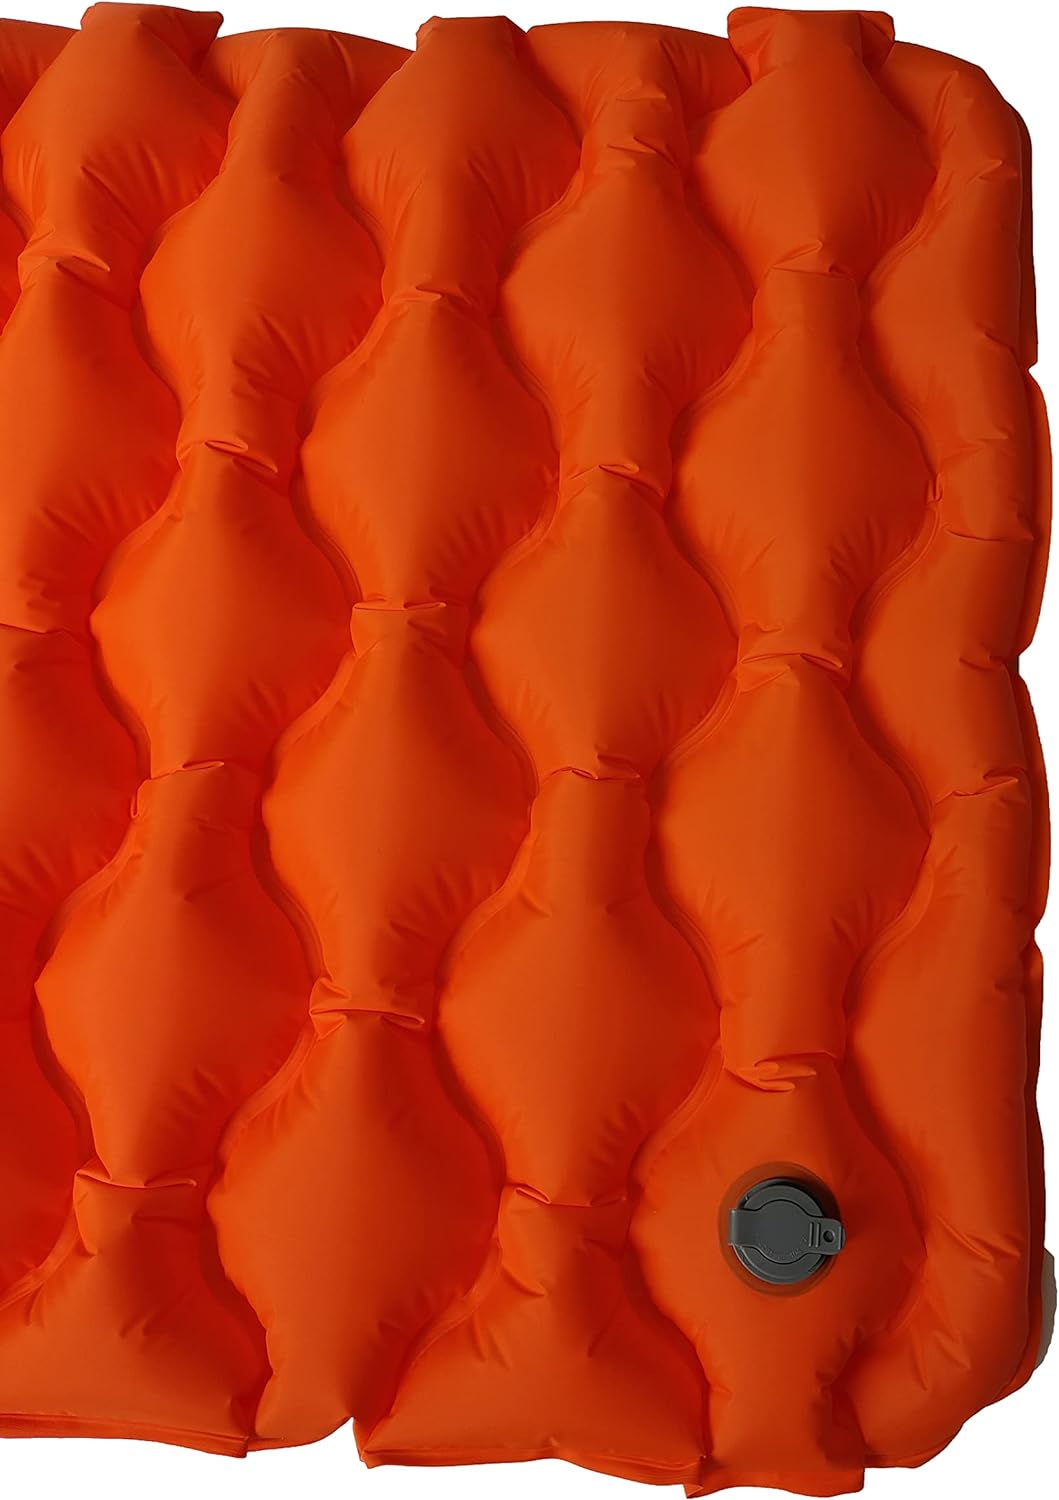 ADEPTNA Inflatable Camping Sleeping Mat with Pillow Ultralight Sleeping Mat for Camping Hiking Outdoor Backpacking – It is compact and lightweight